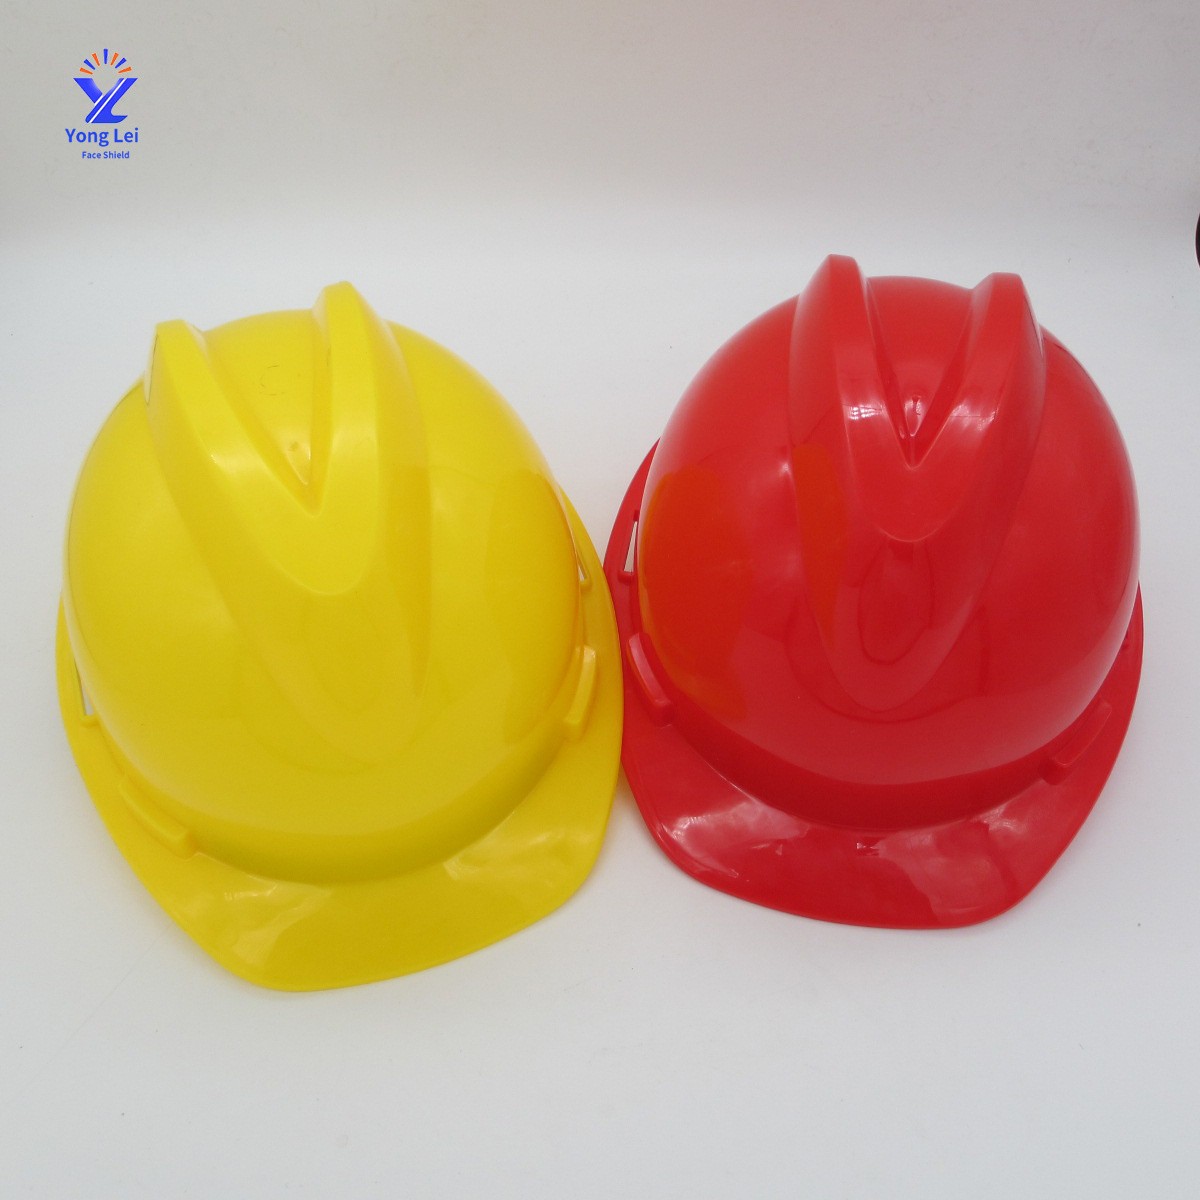 Factory Sales Construction Safety Helmet Anti-Smashing Breathable High Impact HDPE Helmet